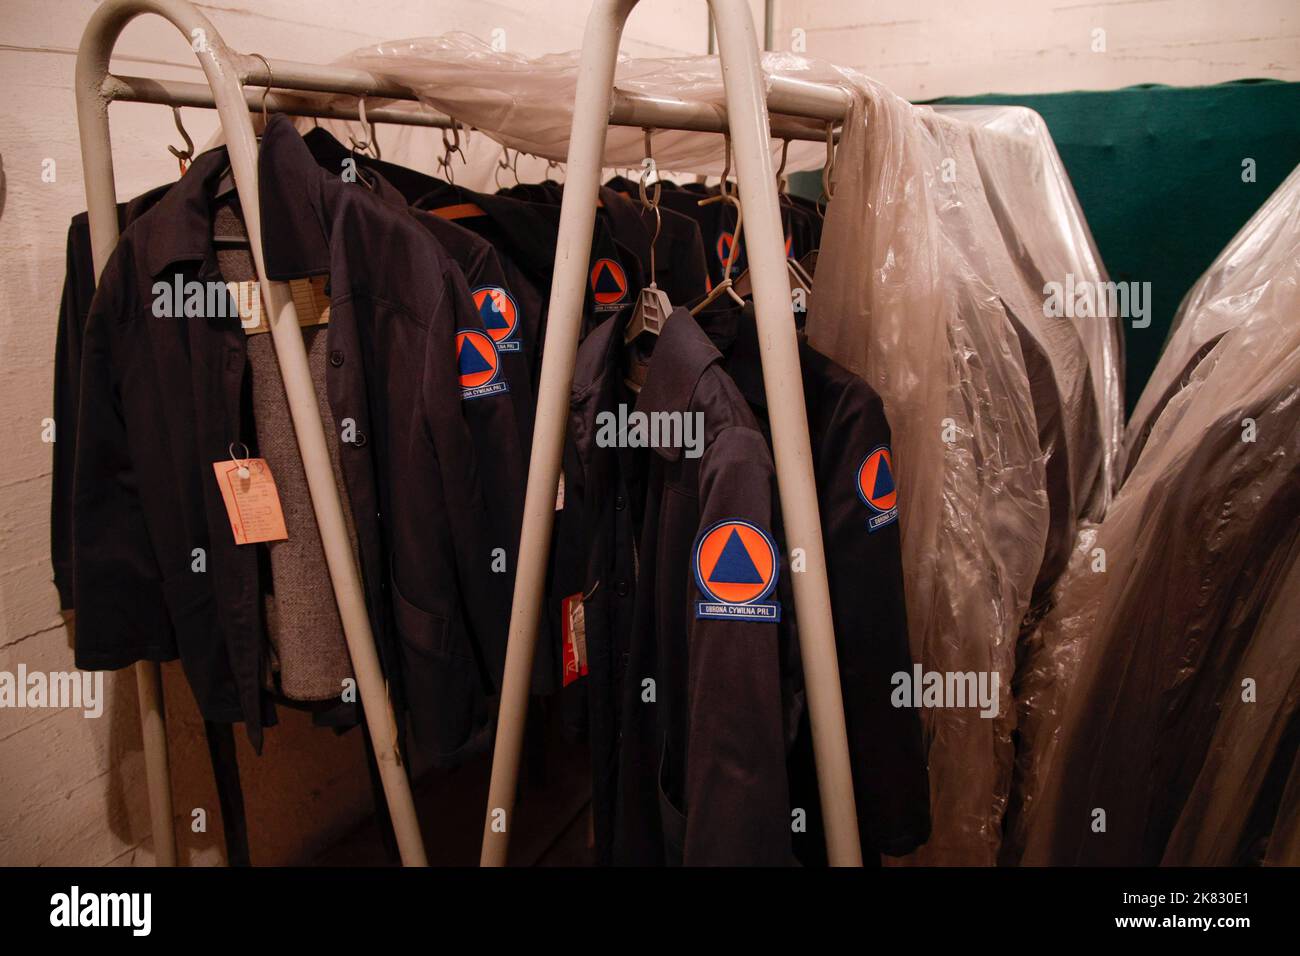 Warsaw, Poland. 20th Oct, 2022. Uniforms of the Soviet era Civial Defence Forces (Obrona Cywilna PRL) are seen in a disused bomb shelter in Warsaw, Poland on 20 October, 2022. Polish fire services are taking inventory of the country's 62 thousand bomb shelters.  Deputy Interior Minister Maciej Wasik said while the country is not under threat preparations for a 'worst case scenario' need to be made. Polish presidnet Andrzej Duda during an interview with Italian television said under threat of what he called Russia's 'new imperialism' Poland could be next if Ukraine falls. (Photo by Jaap Arriens Stock Photo